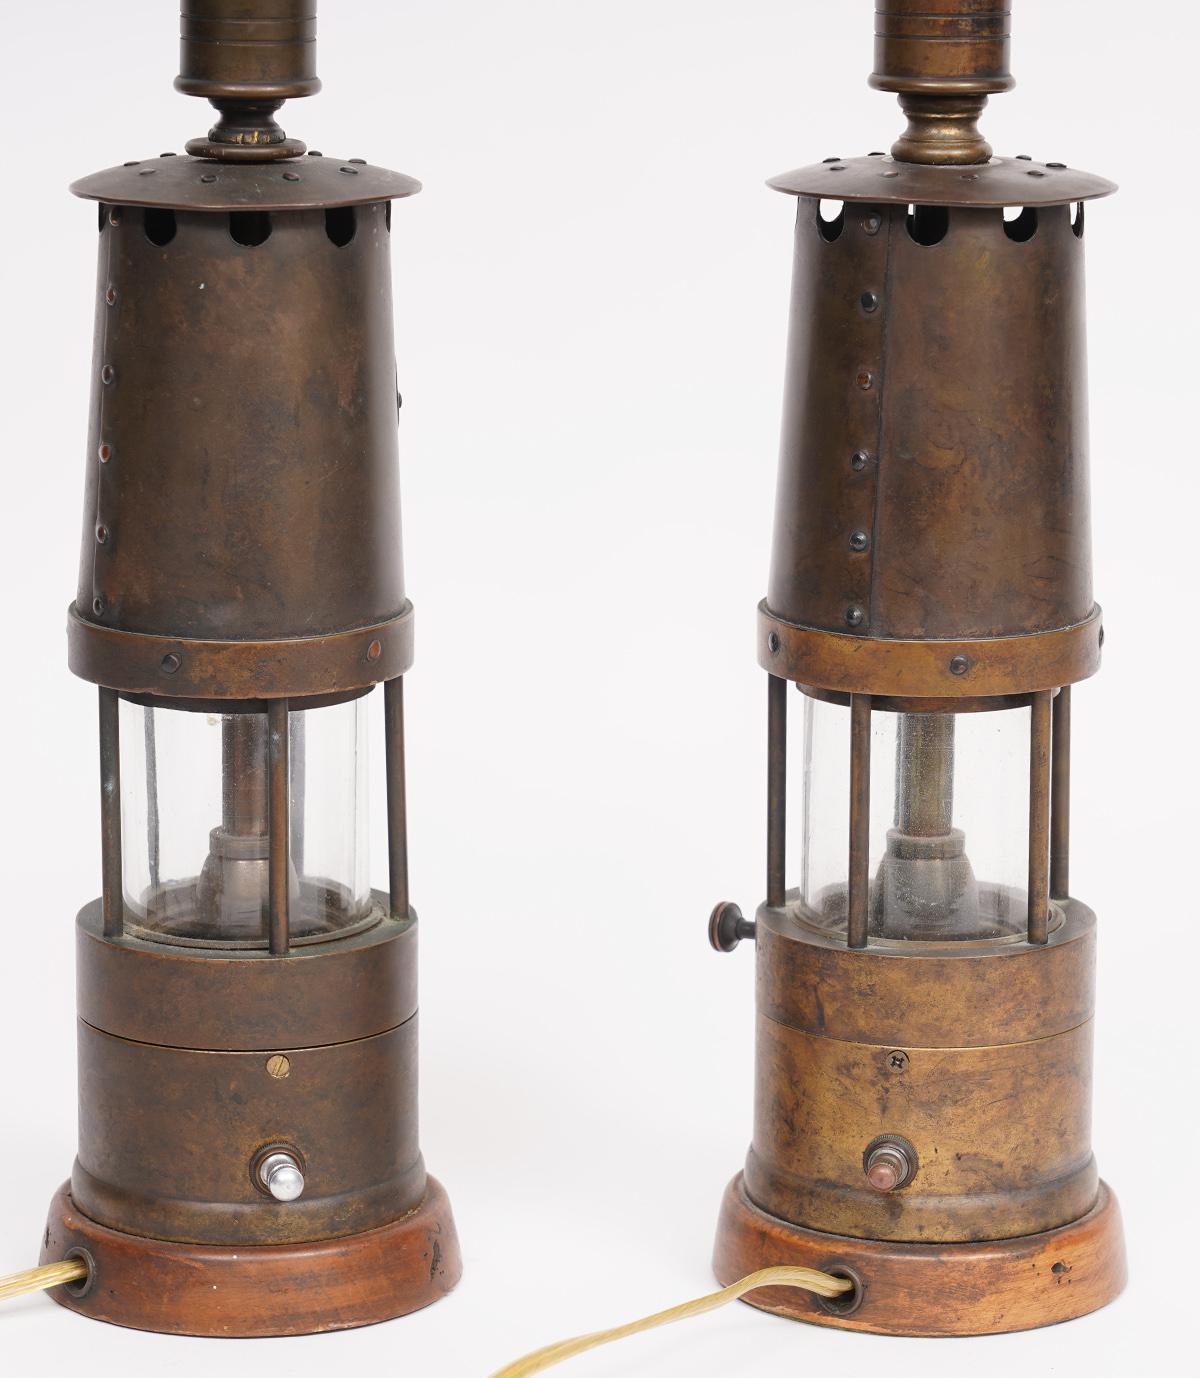 Pair of Industrial Miner's Lanterns Marked Dinkelspiel Converted to Table Lamps 1